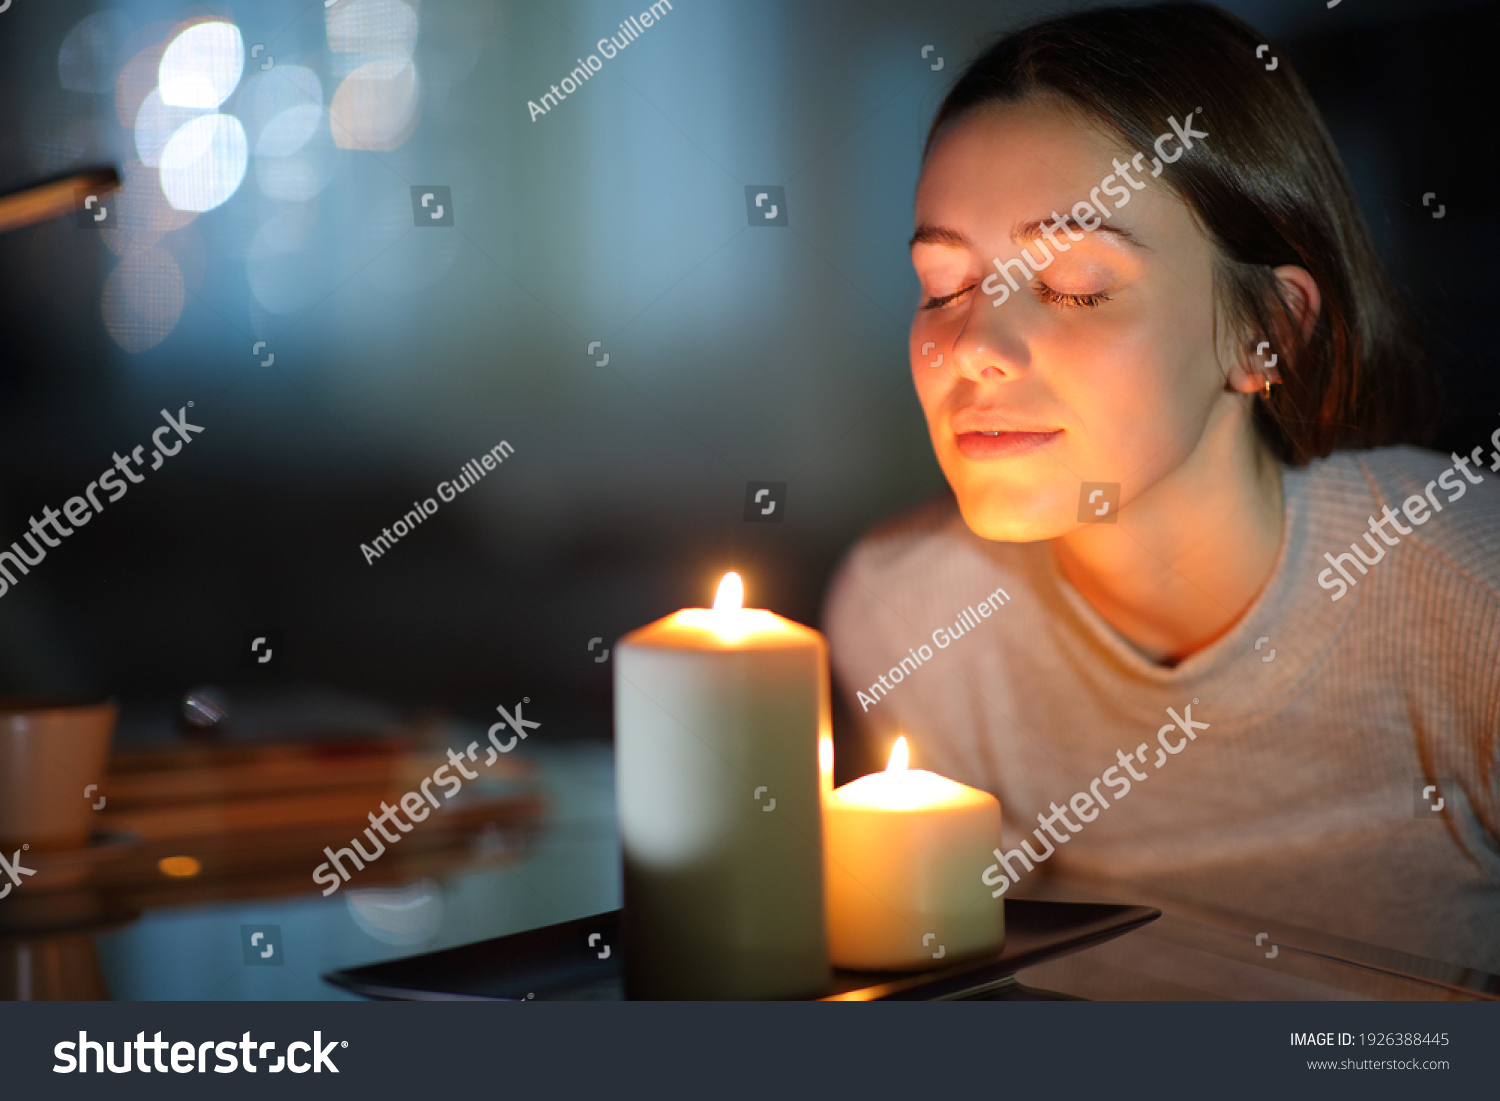 Relaxed woman smelling a lighted scented candle in the night at home #1926388445